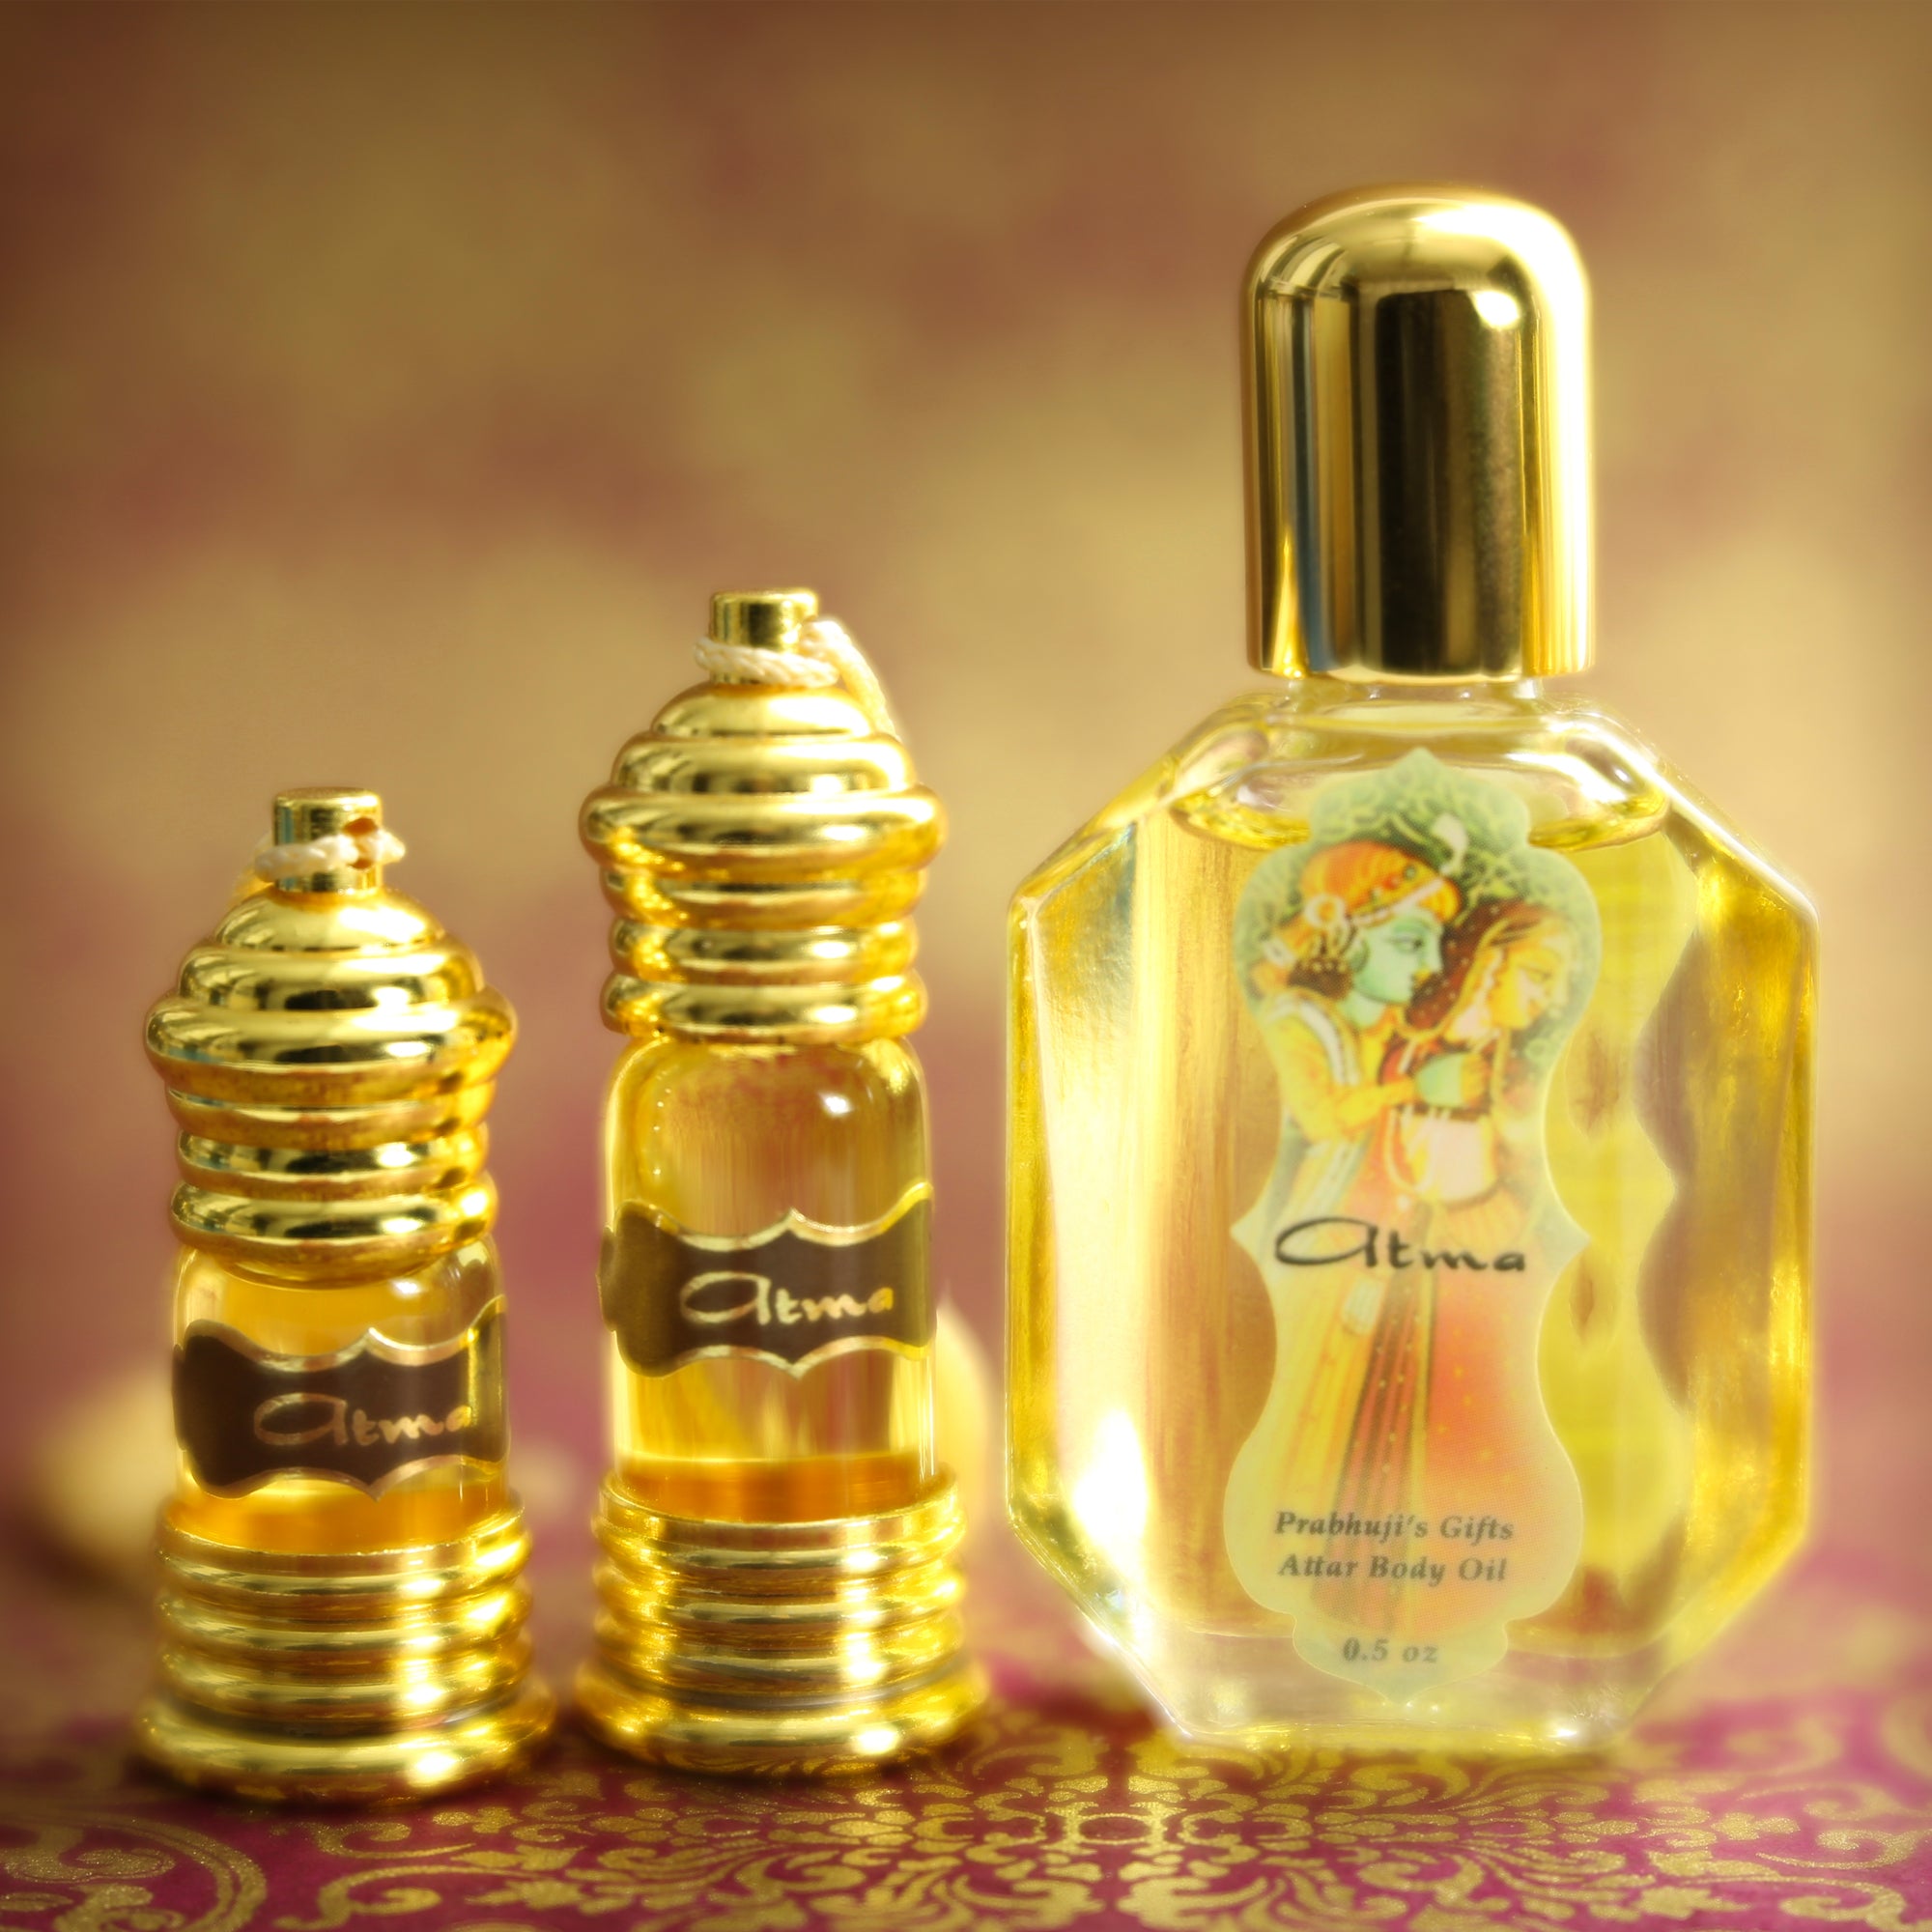 Atma Attar Oil - Enlightenment - Wholesale and Retail by Prabhuji's Gifts